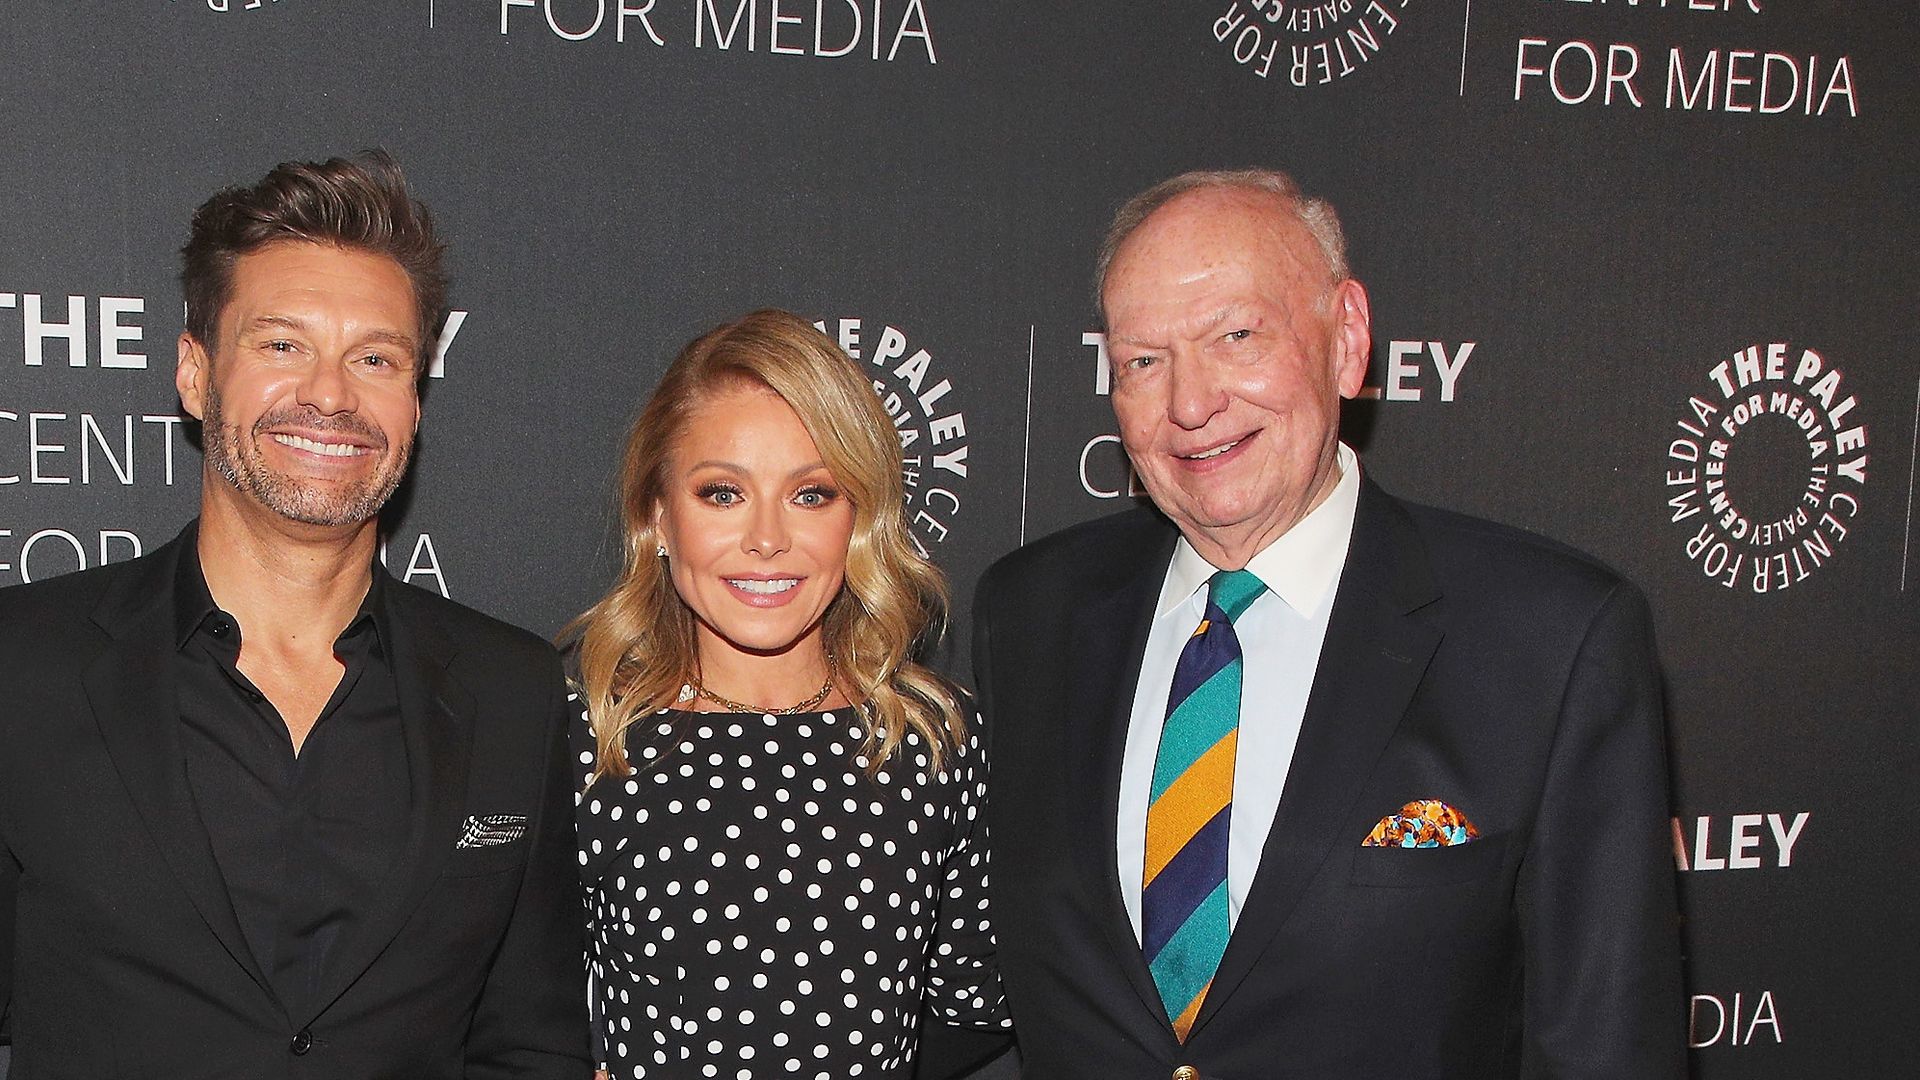 NEW YORK, NEW YORK - MARCH 04: (L-R) Michael Gelman, Ryan Seacrest, Kelly Ripa and Art Moore attend The Paley Center For Media Presents: An Evening with "Live with Kelly and Ryan" at Paley Center For Media on March 04, 2020 in New York City. (Photo by Astrid Stawiarz/Getty Images)